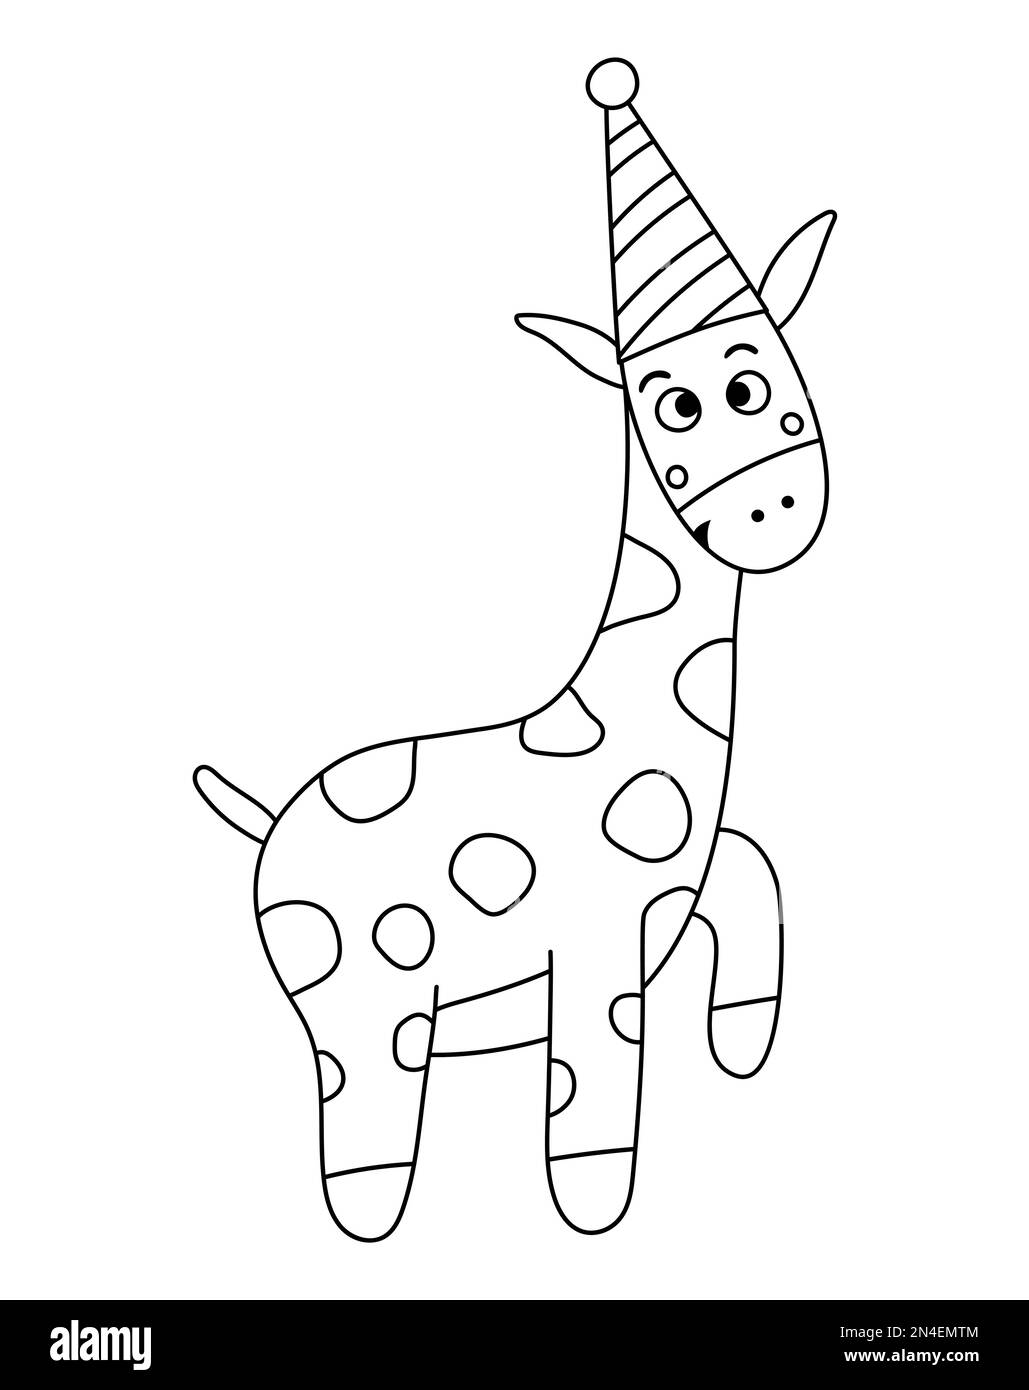 Vector cute black and white giraffe in birthday hat. Funny b-day animal for card, poster, print design. Outline holiday illustration for kids. Cheerfu Stock Vector